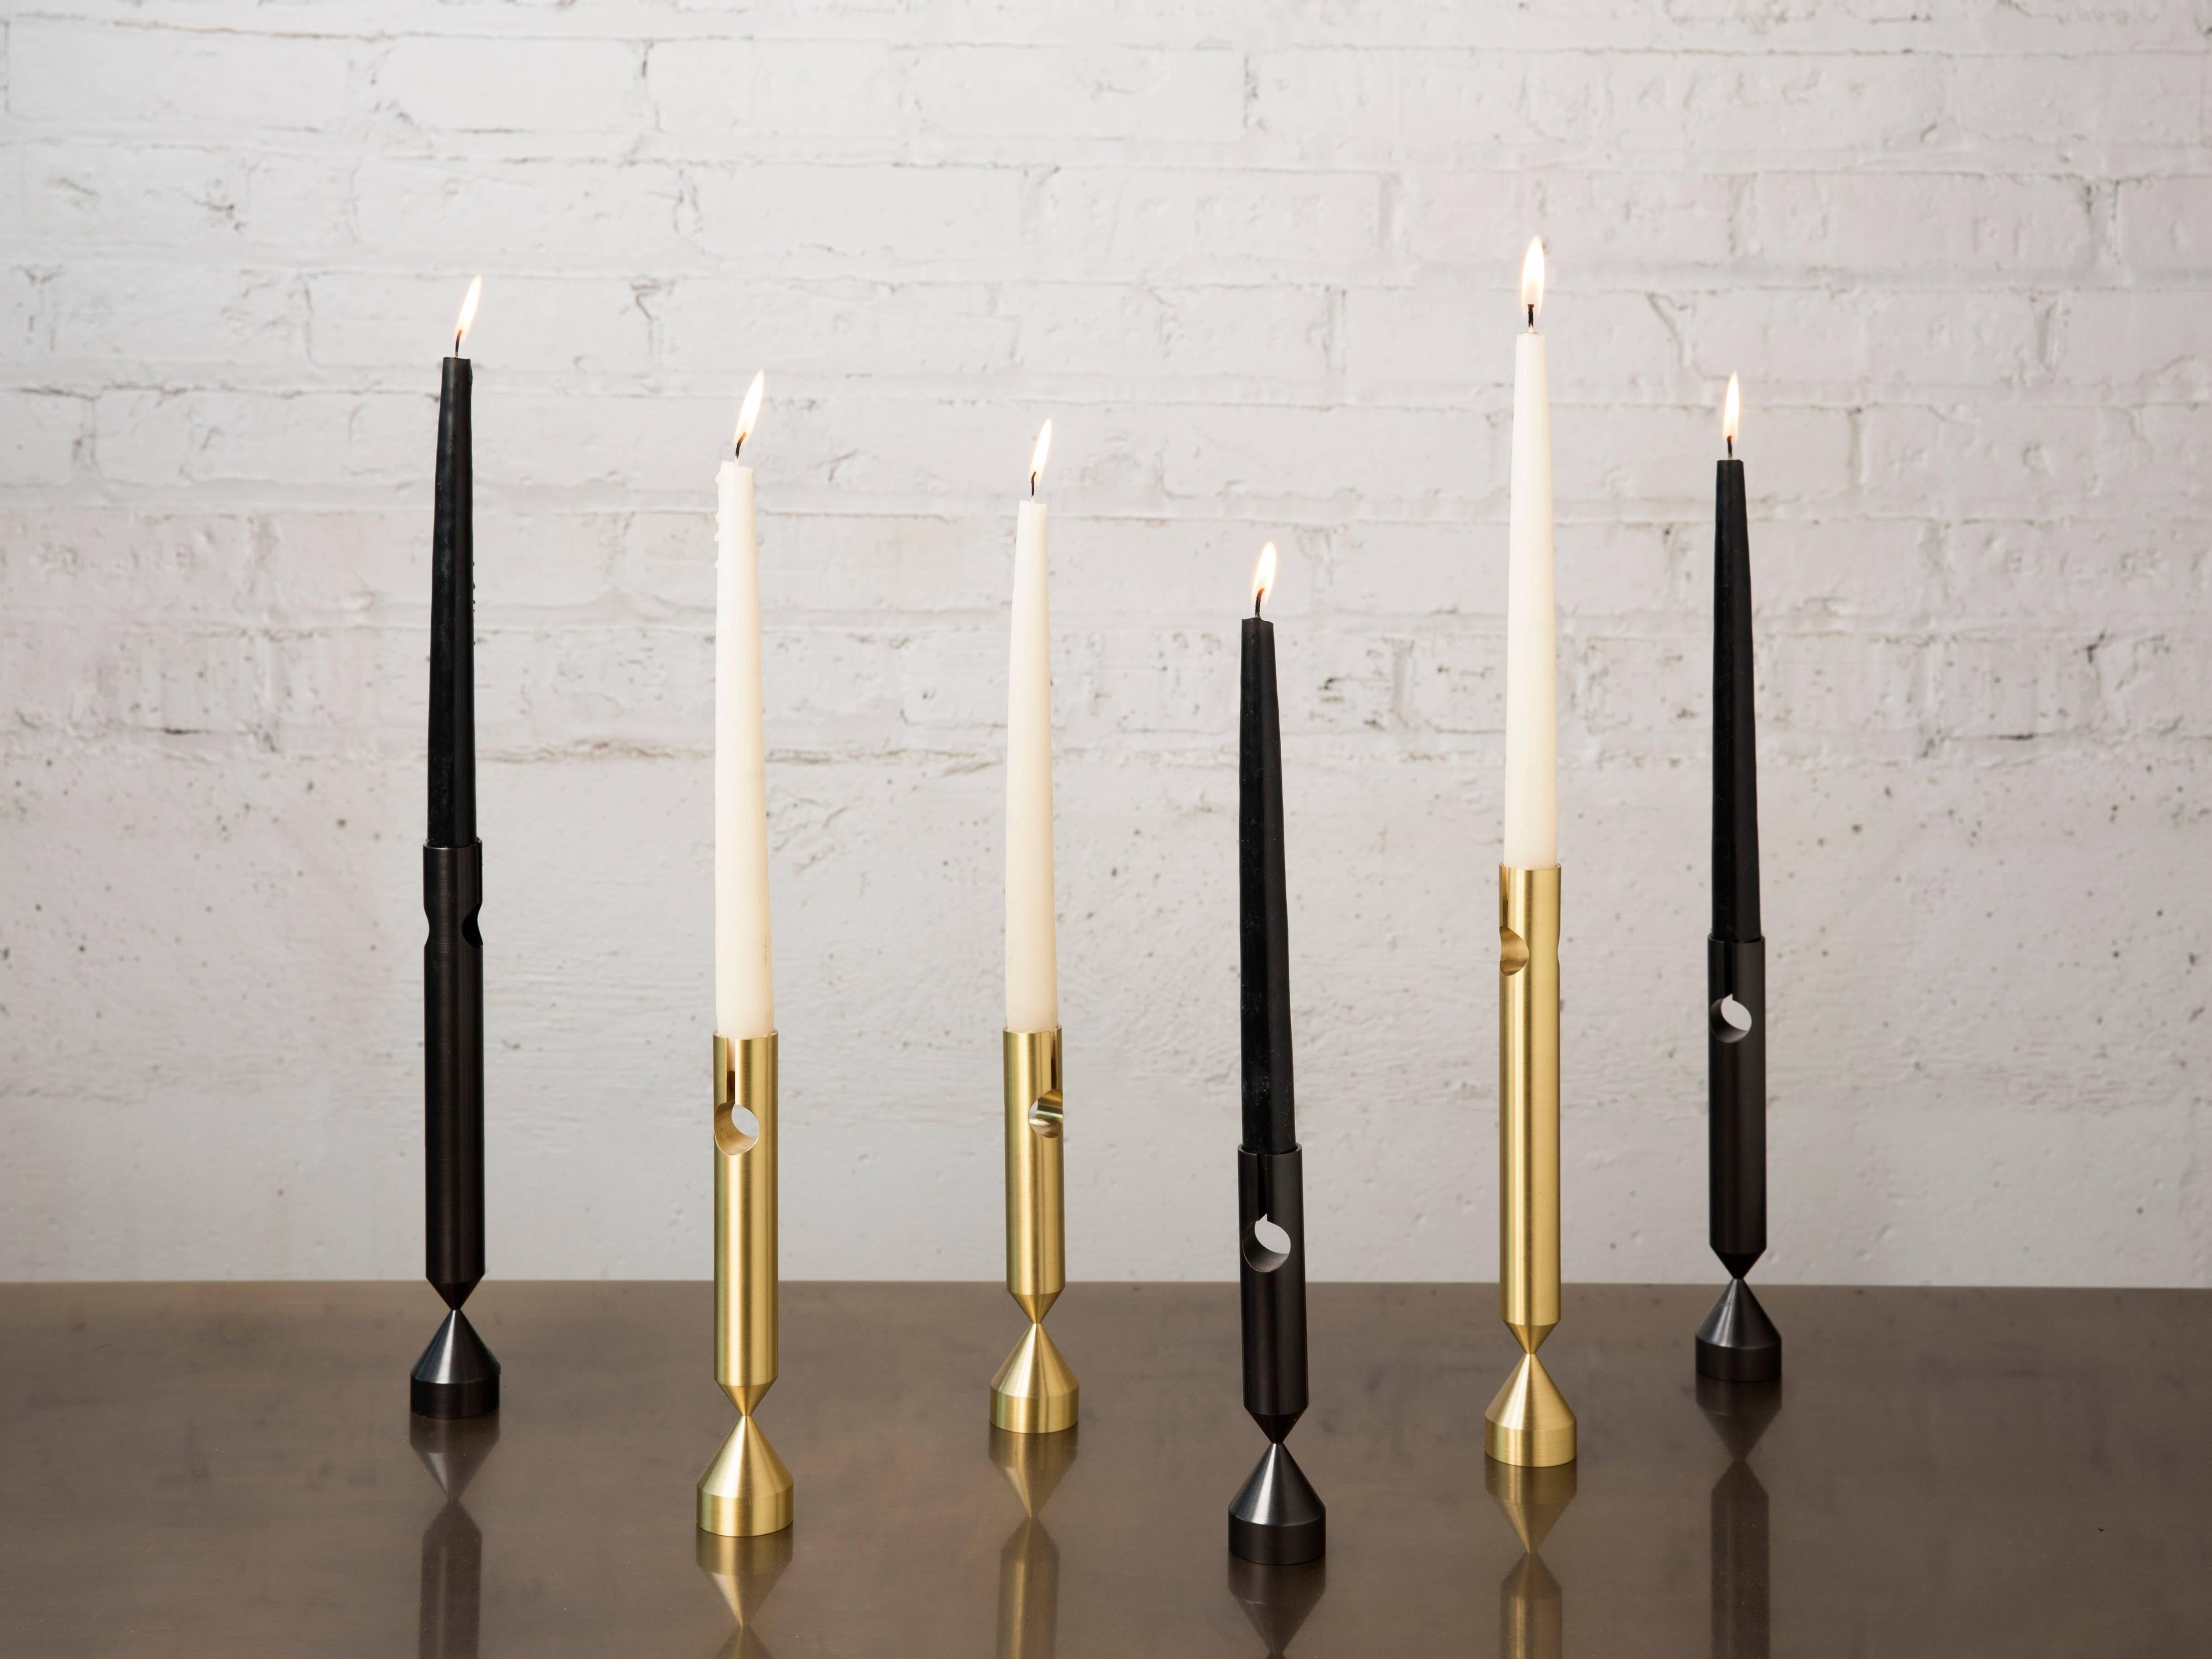 Contemporary Pillar Candlesticks with Three Sizes, Handcrafted in Chicago For Sale